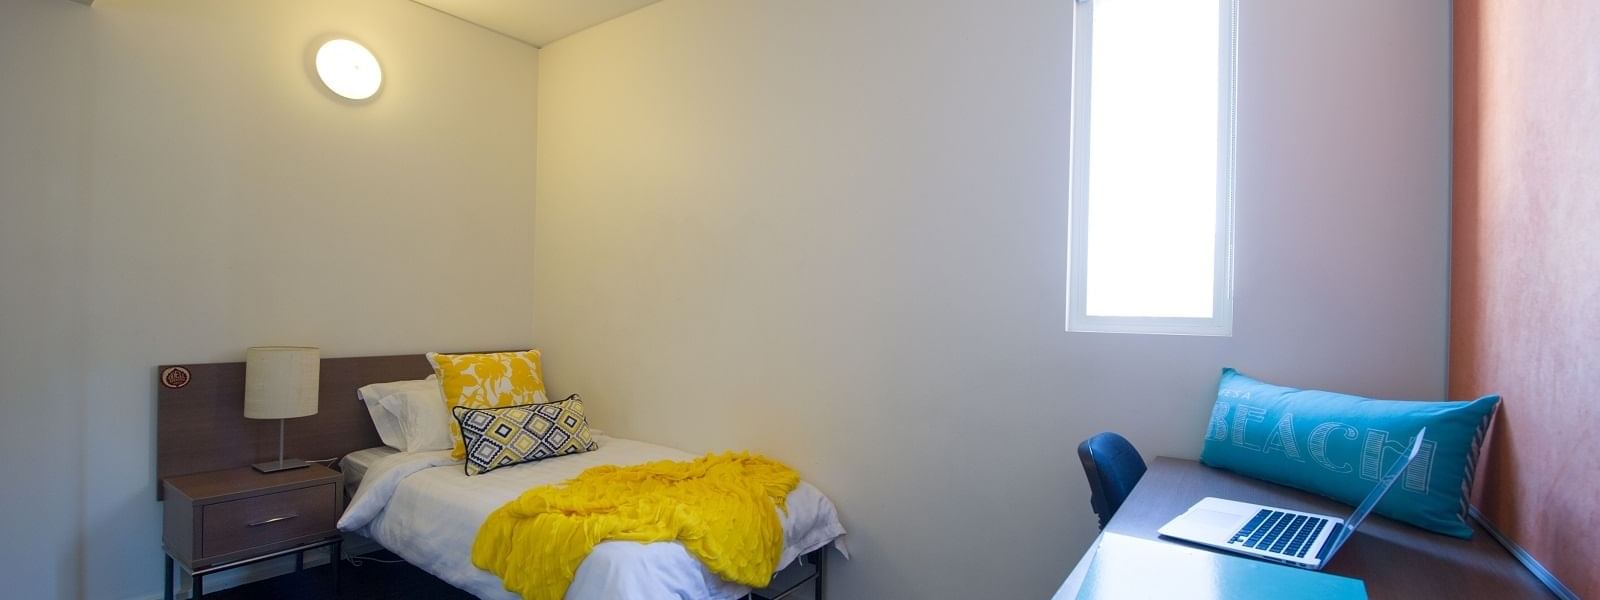 Student Living - East West 1 Bedroom Apartment